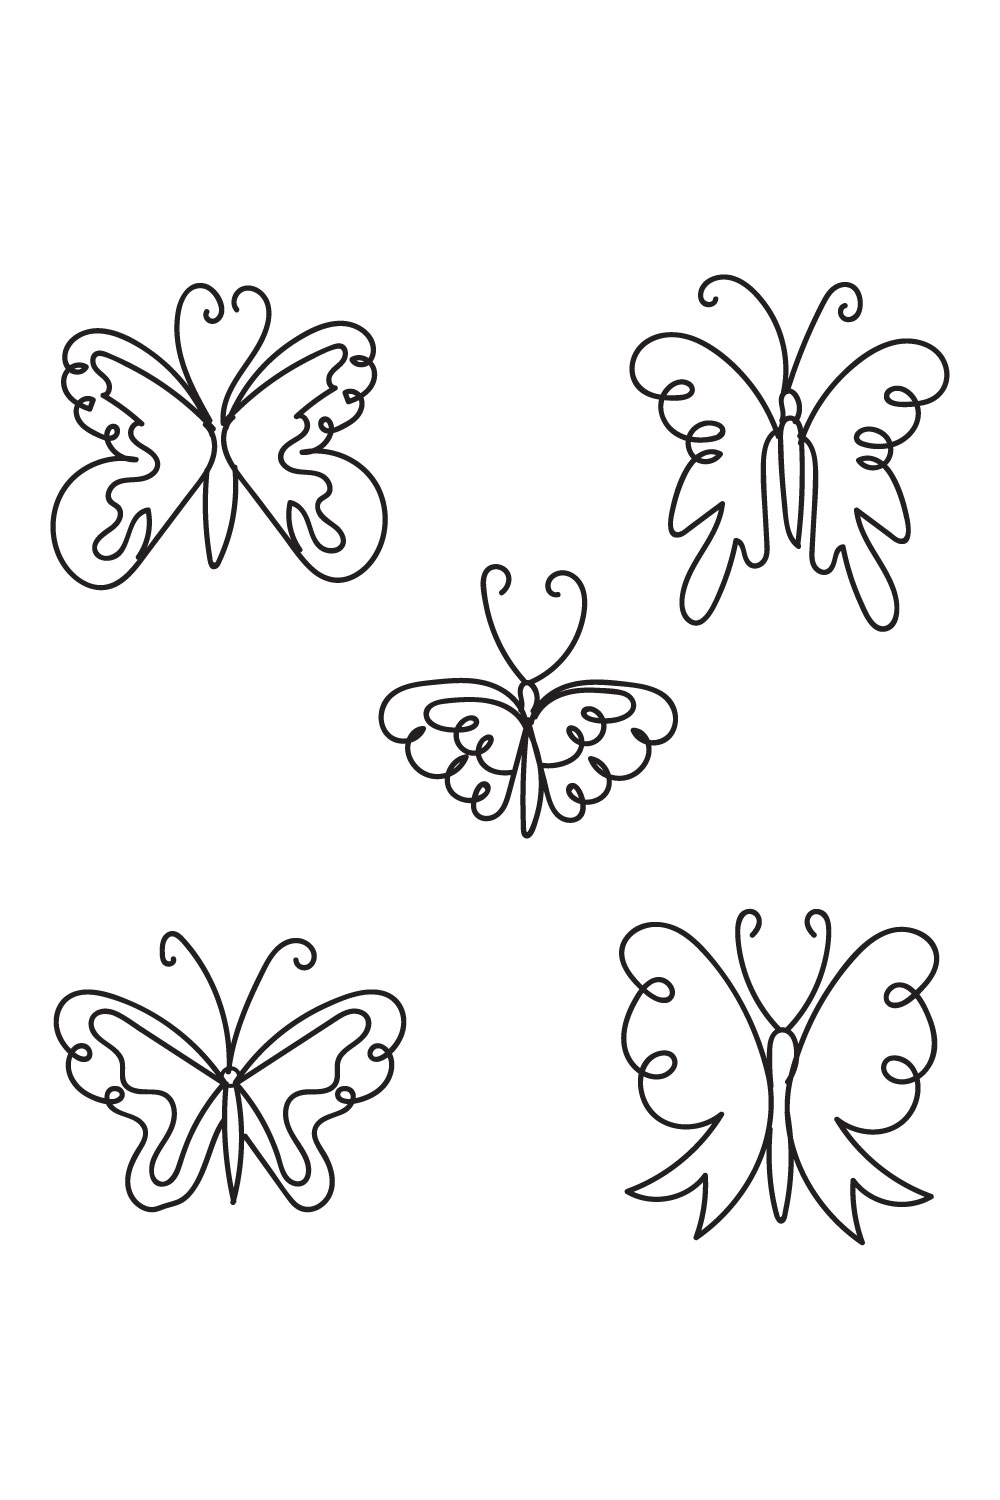 Set of four butterflies that are drawn in black and white.